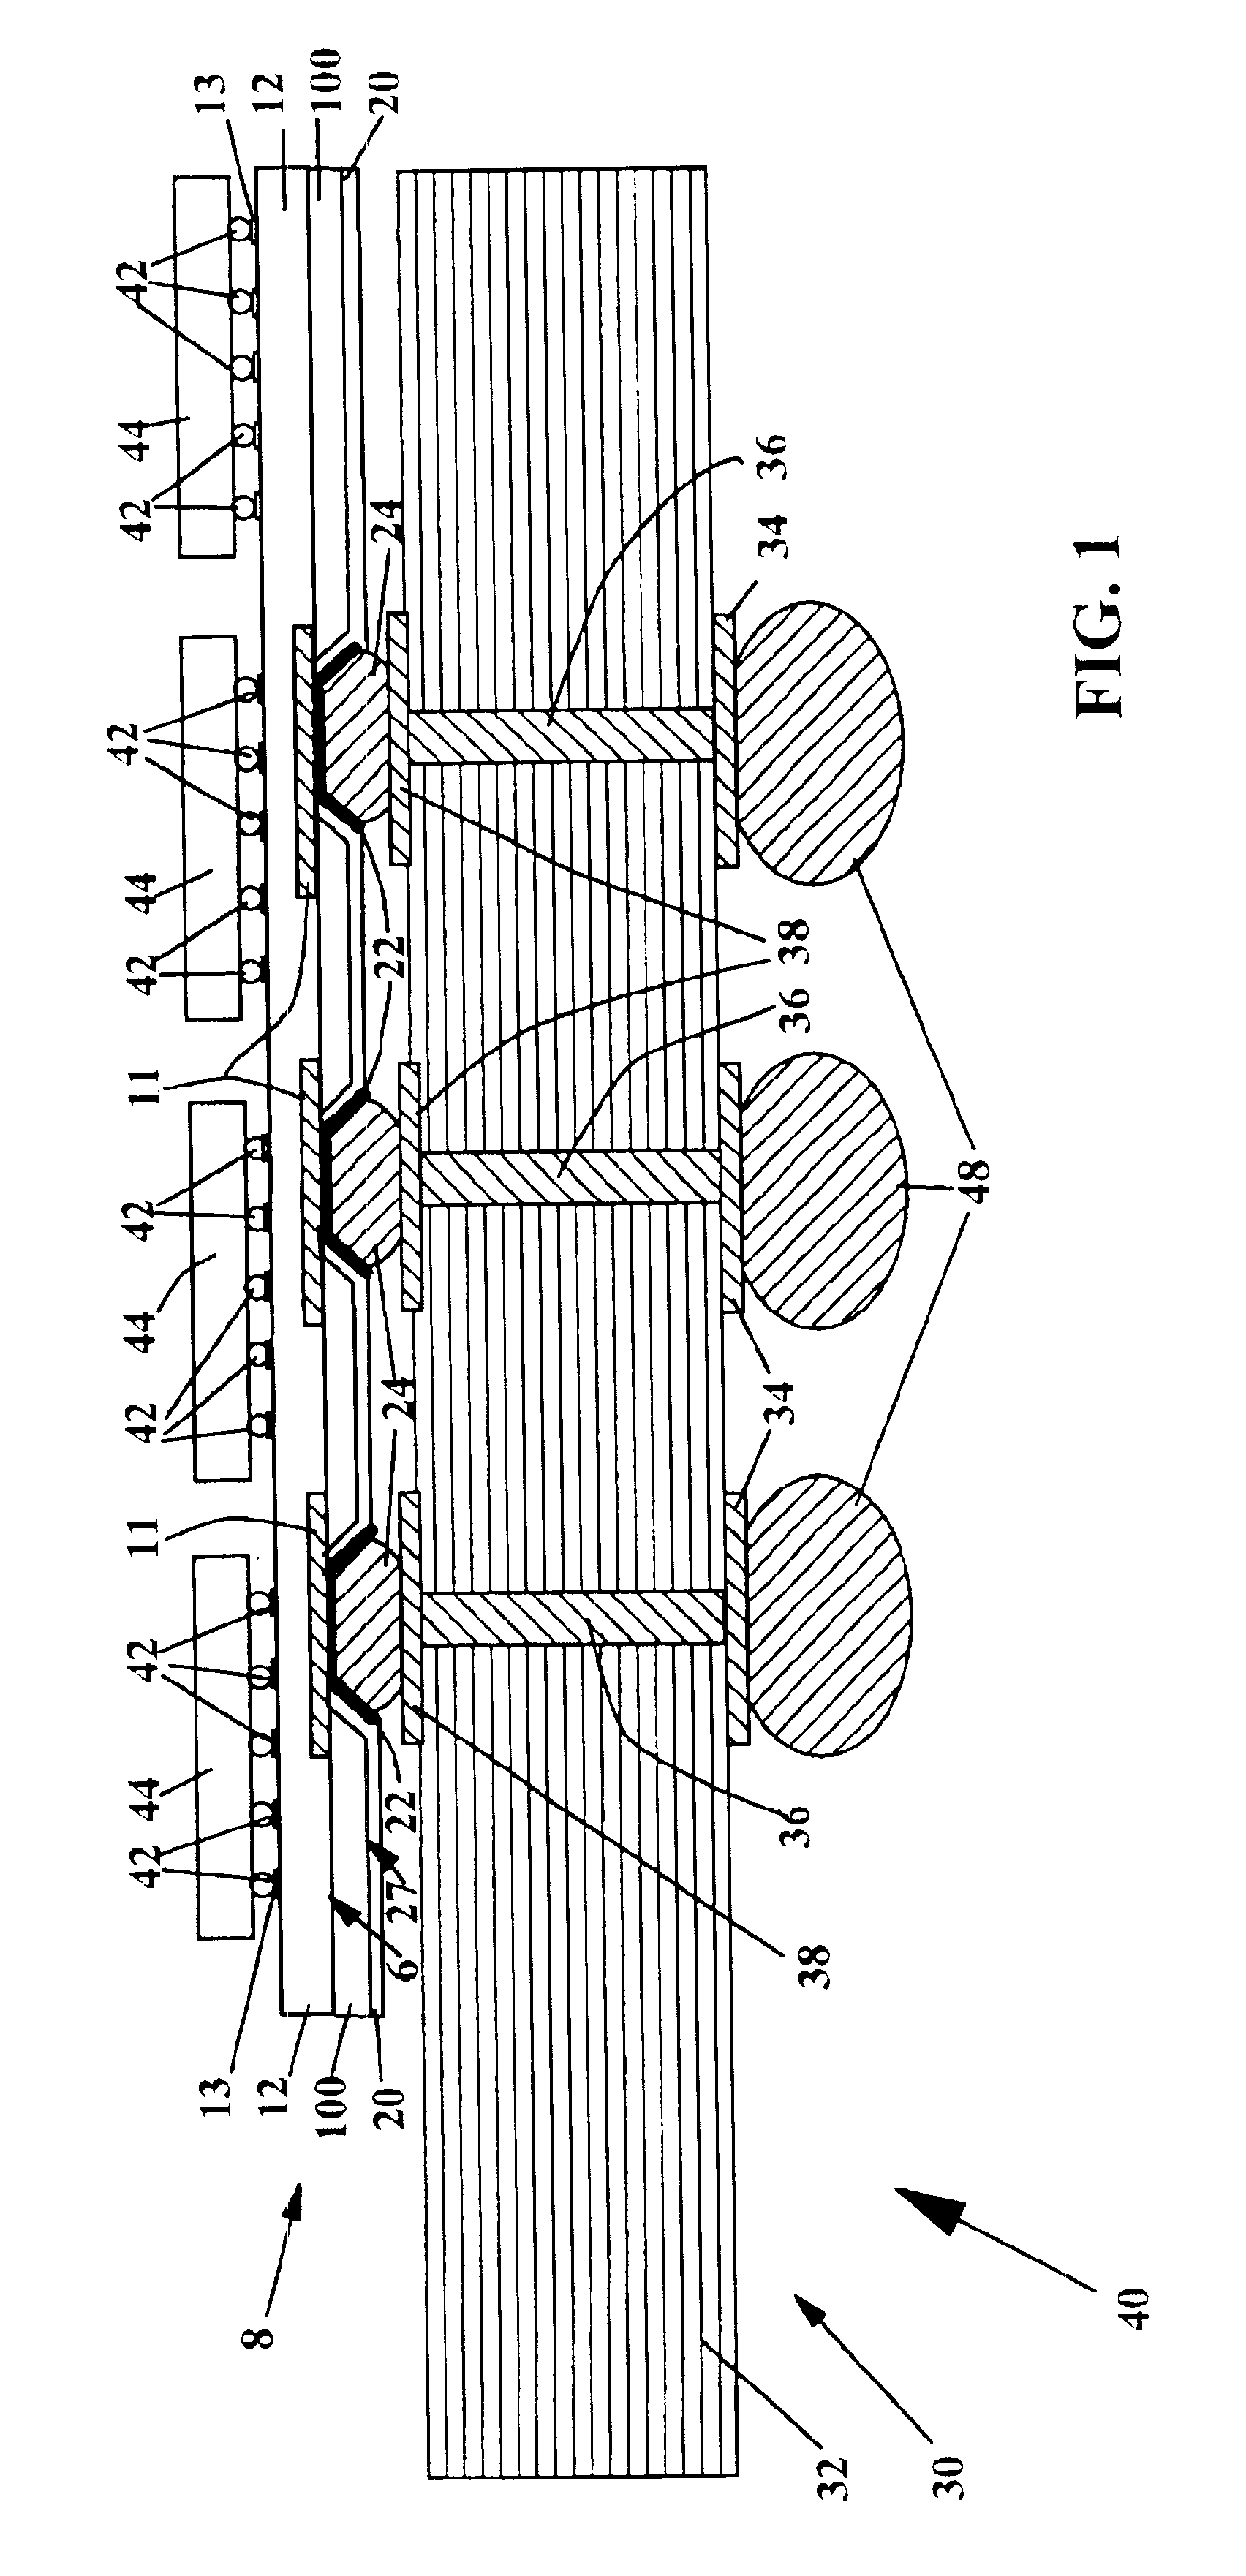 Method of manufacture of silicon based package